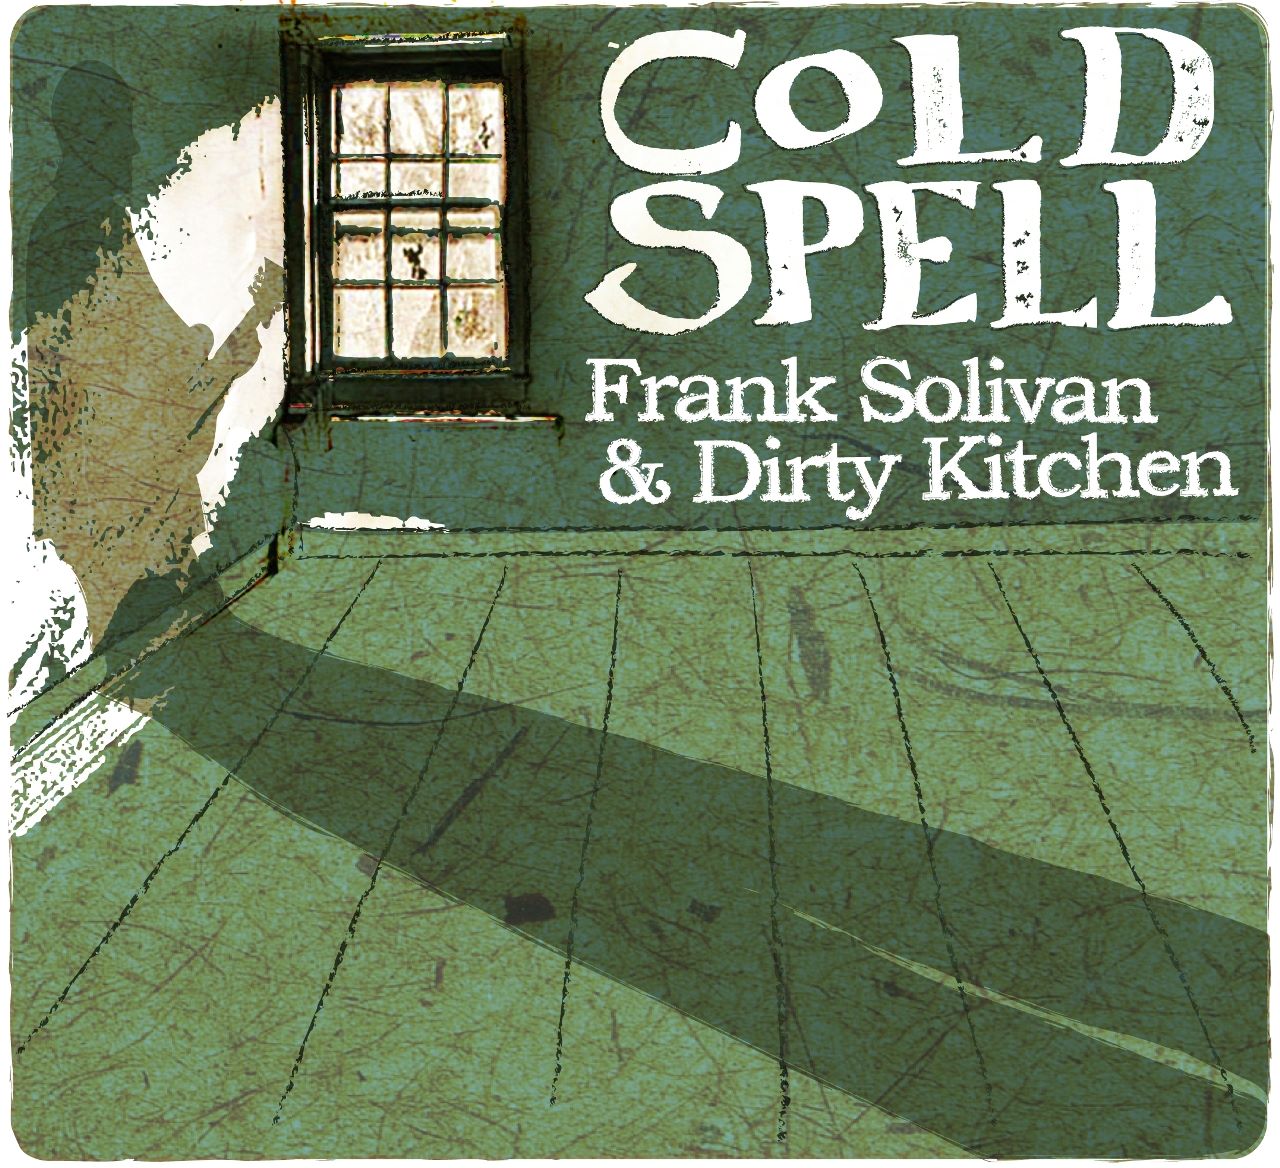 Frank Solivan & Dirty Kitchen - Cold Spell cover album